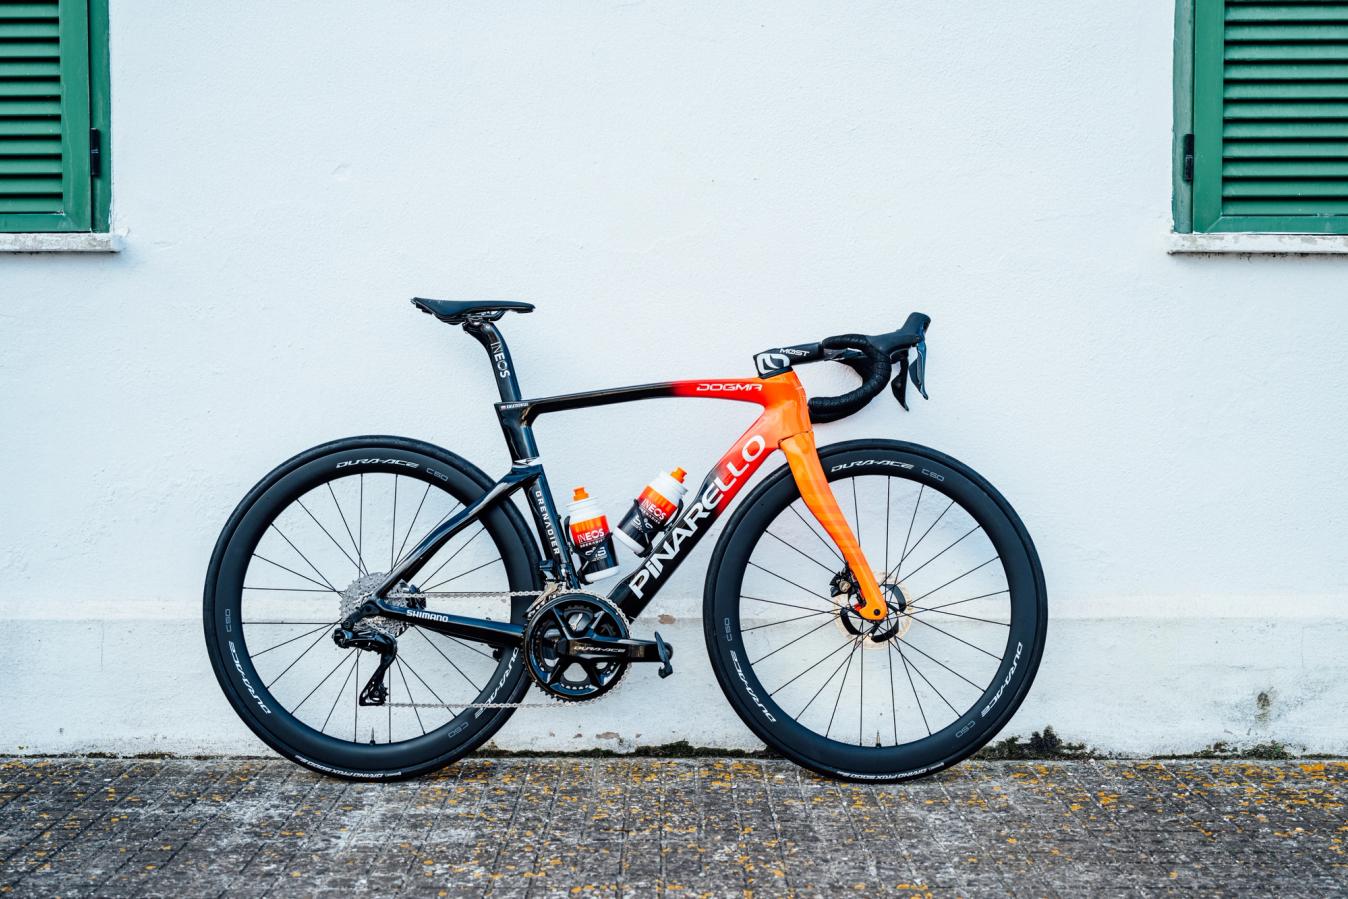 Ineos Grenadiers have only one bike at their disposal which does present a weight penalty over some of the specifically lightweight models other teams can use